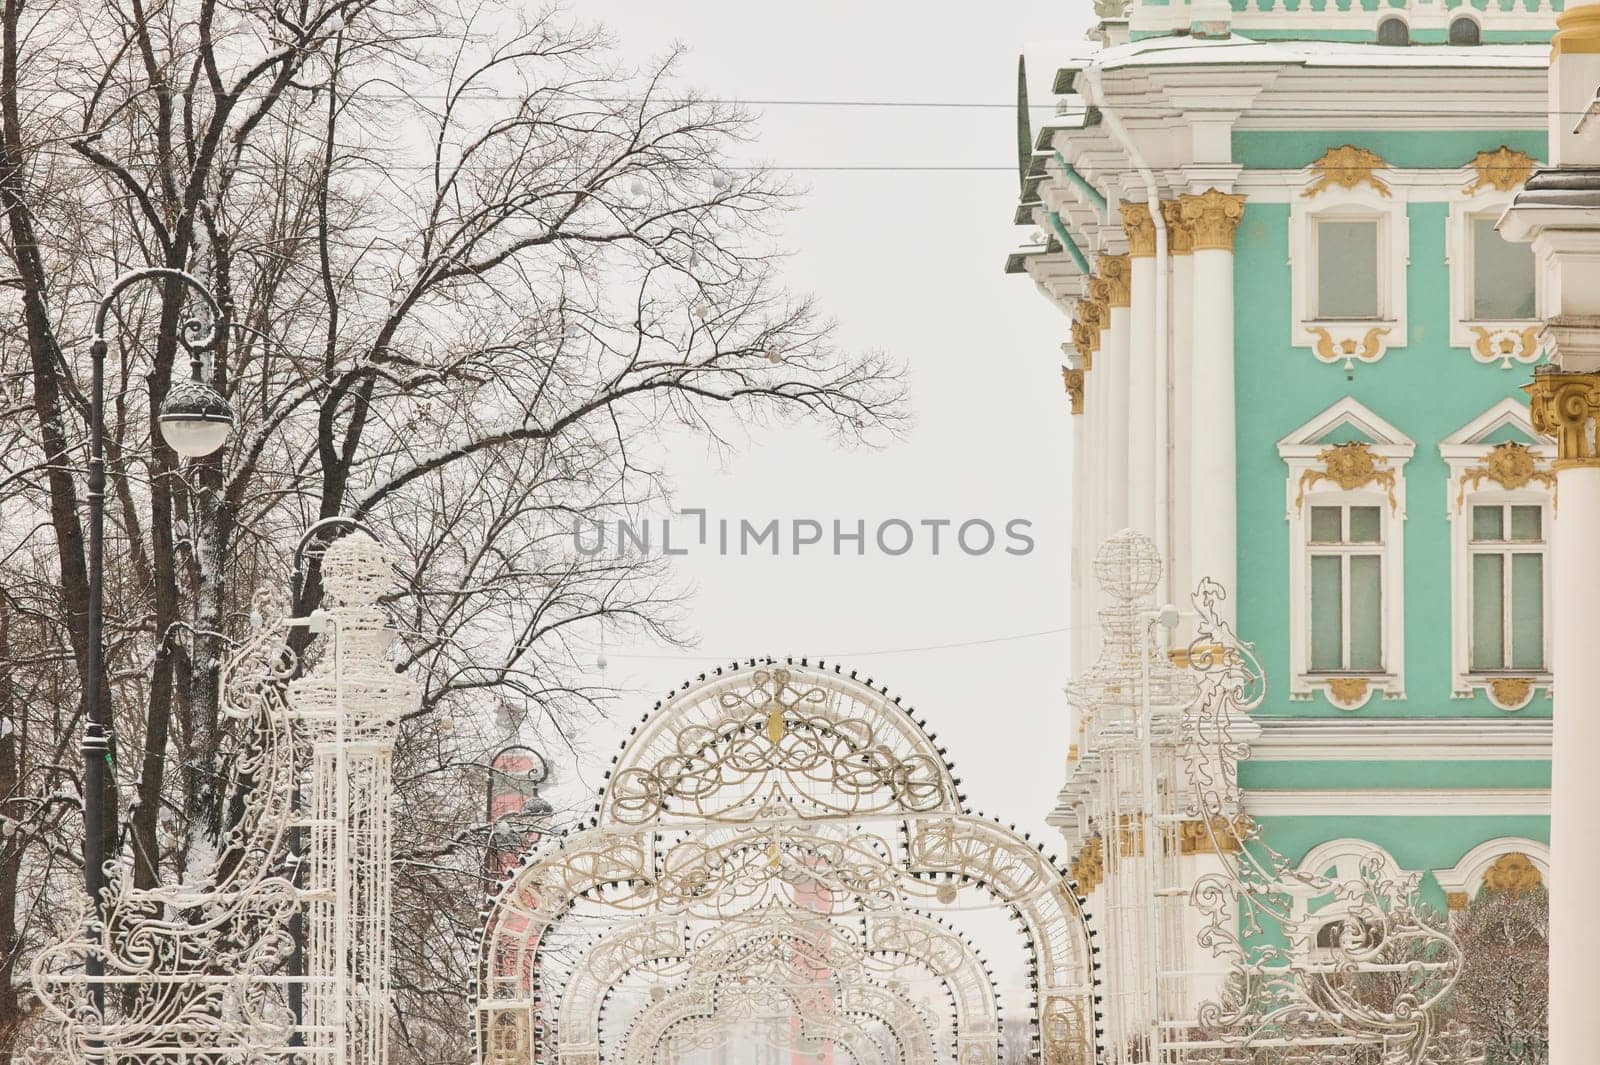 Christmas decoration of festive building of the Hermitage on square Palace in Russia - Saint Petersburg at snowfall by vladimirdrozdin